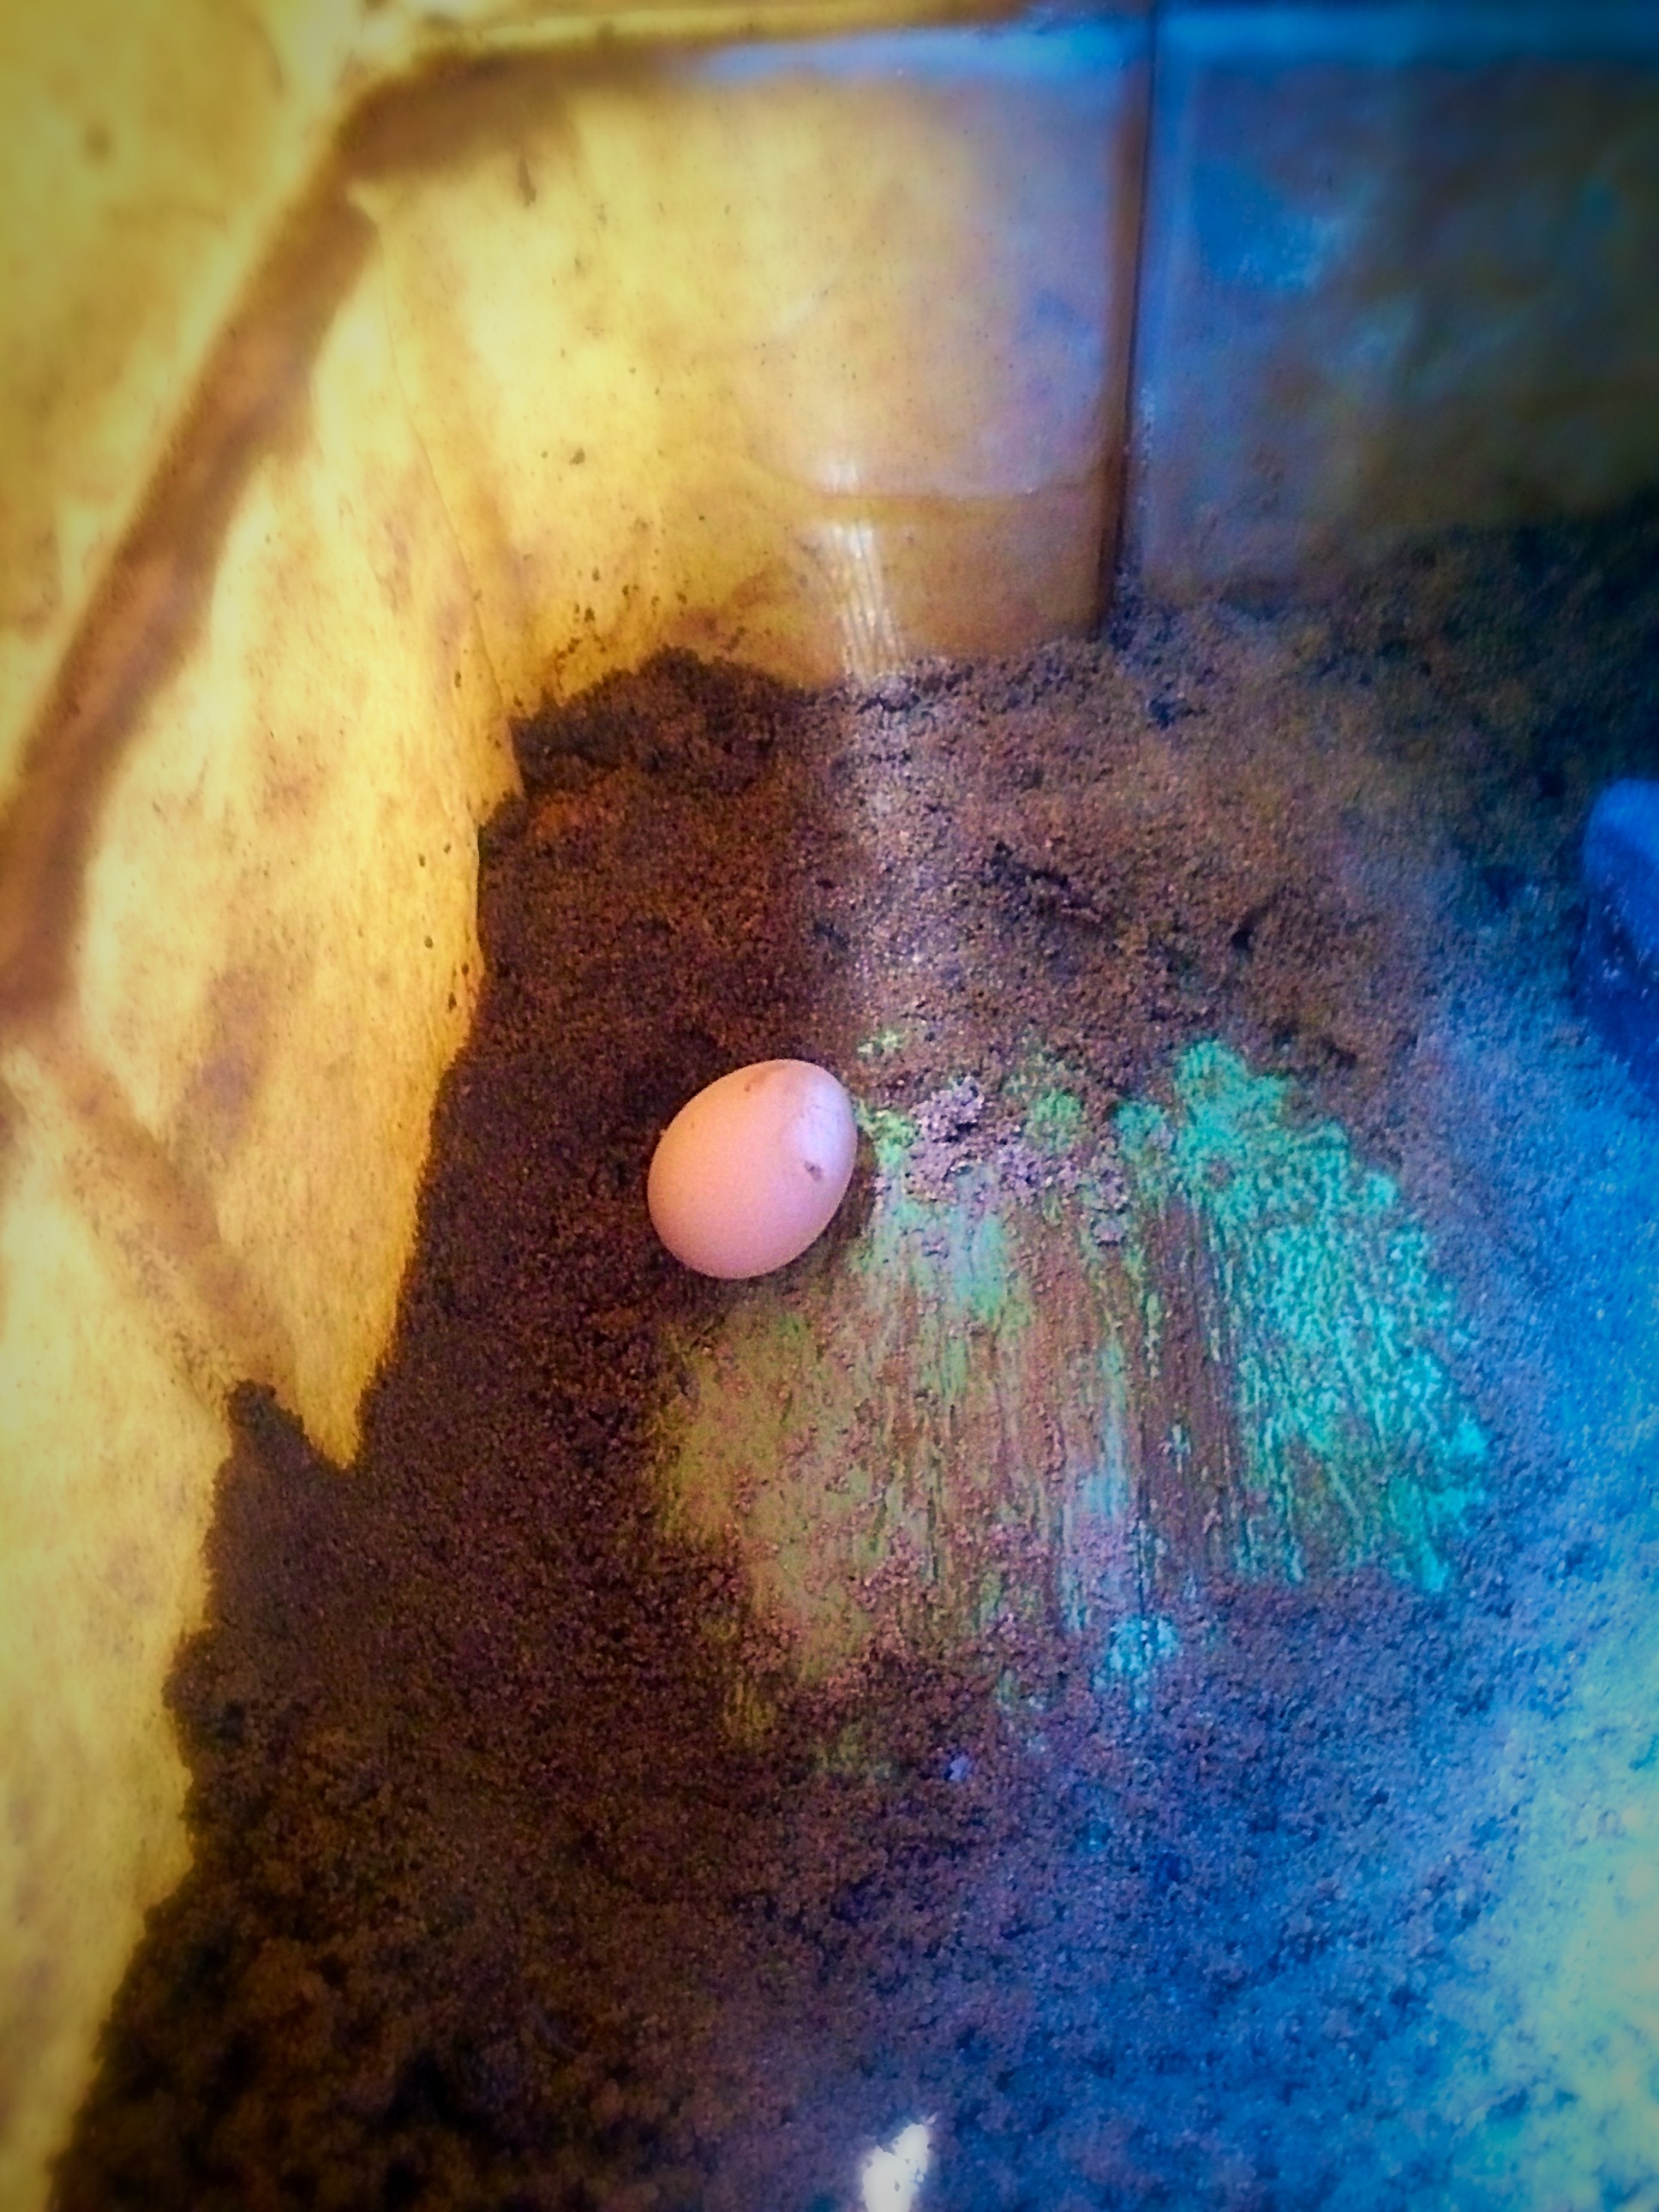 She missed her nest, but I'm happy to have an egg!